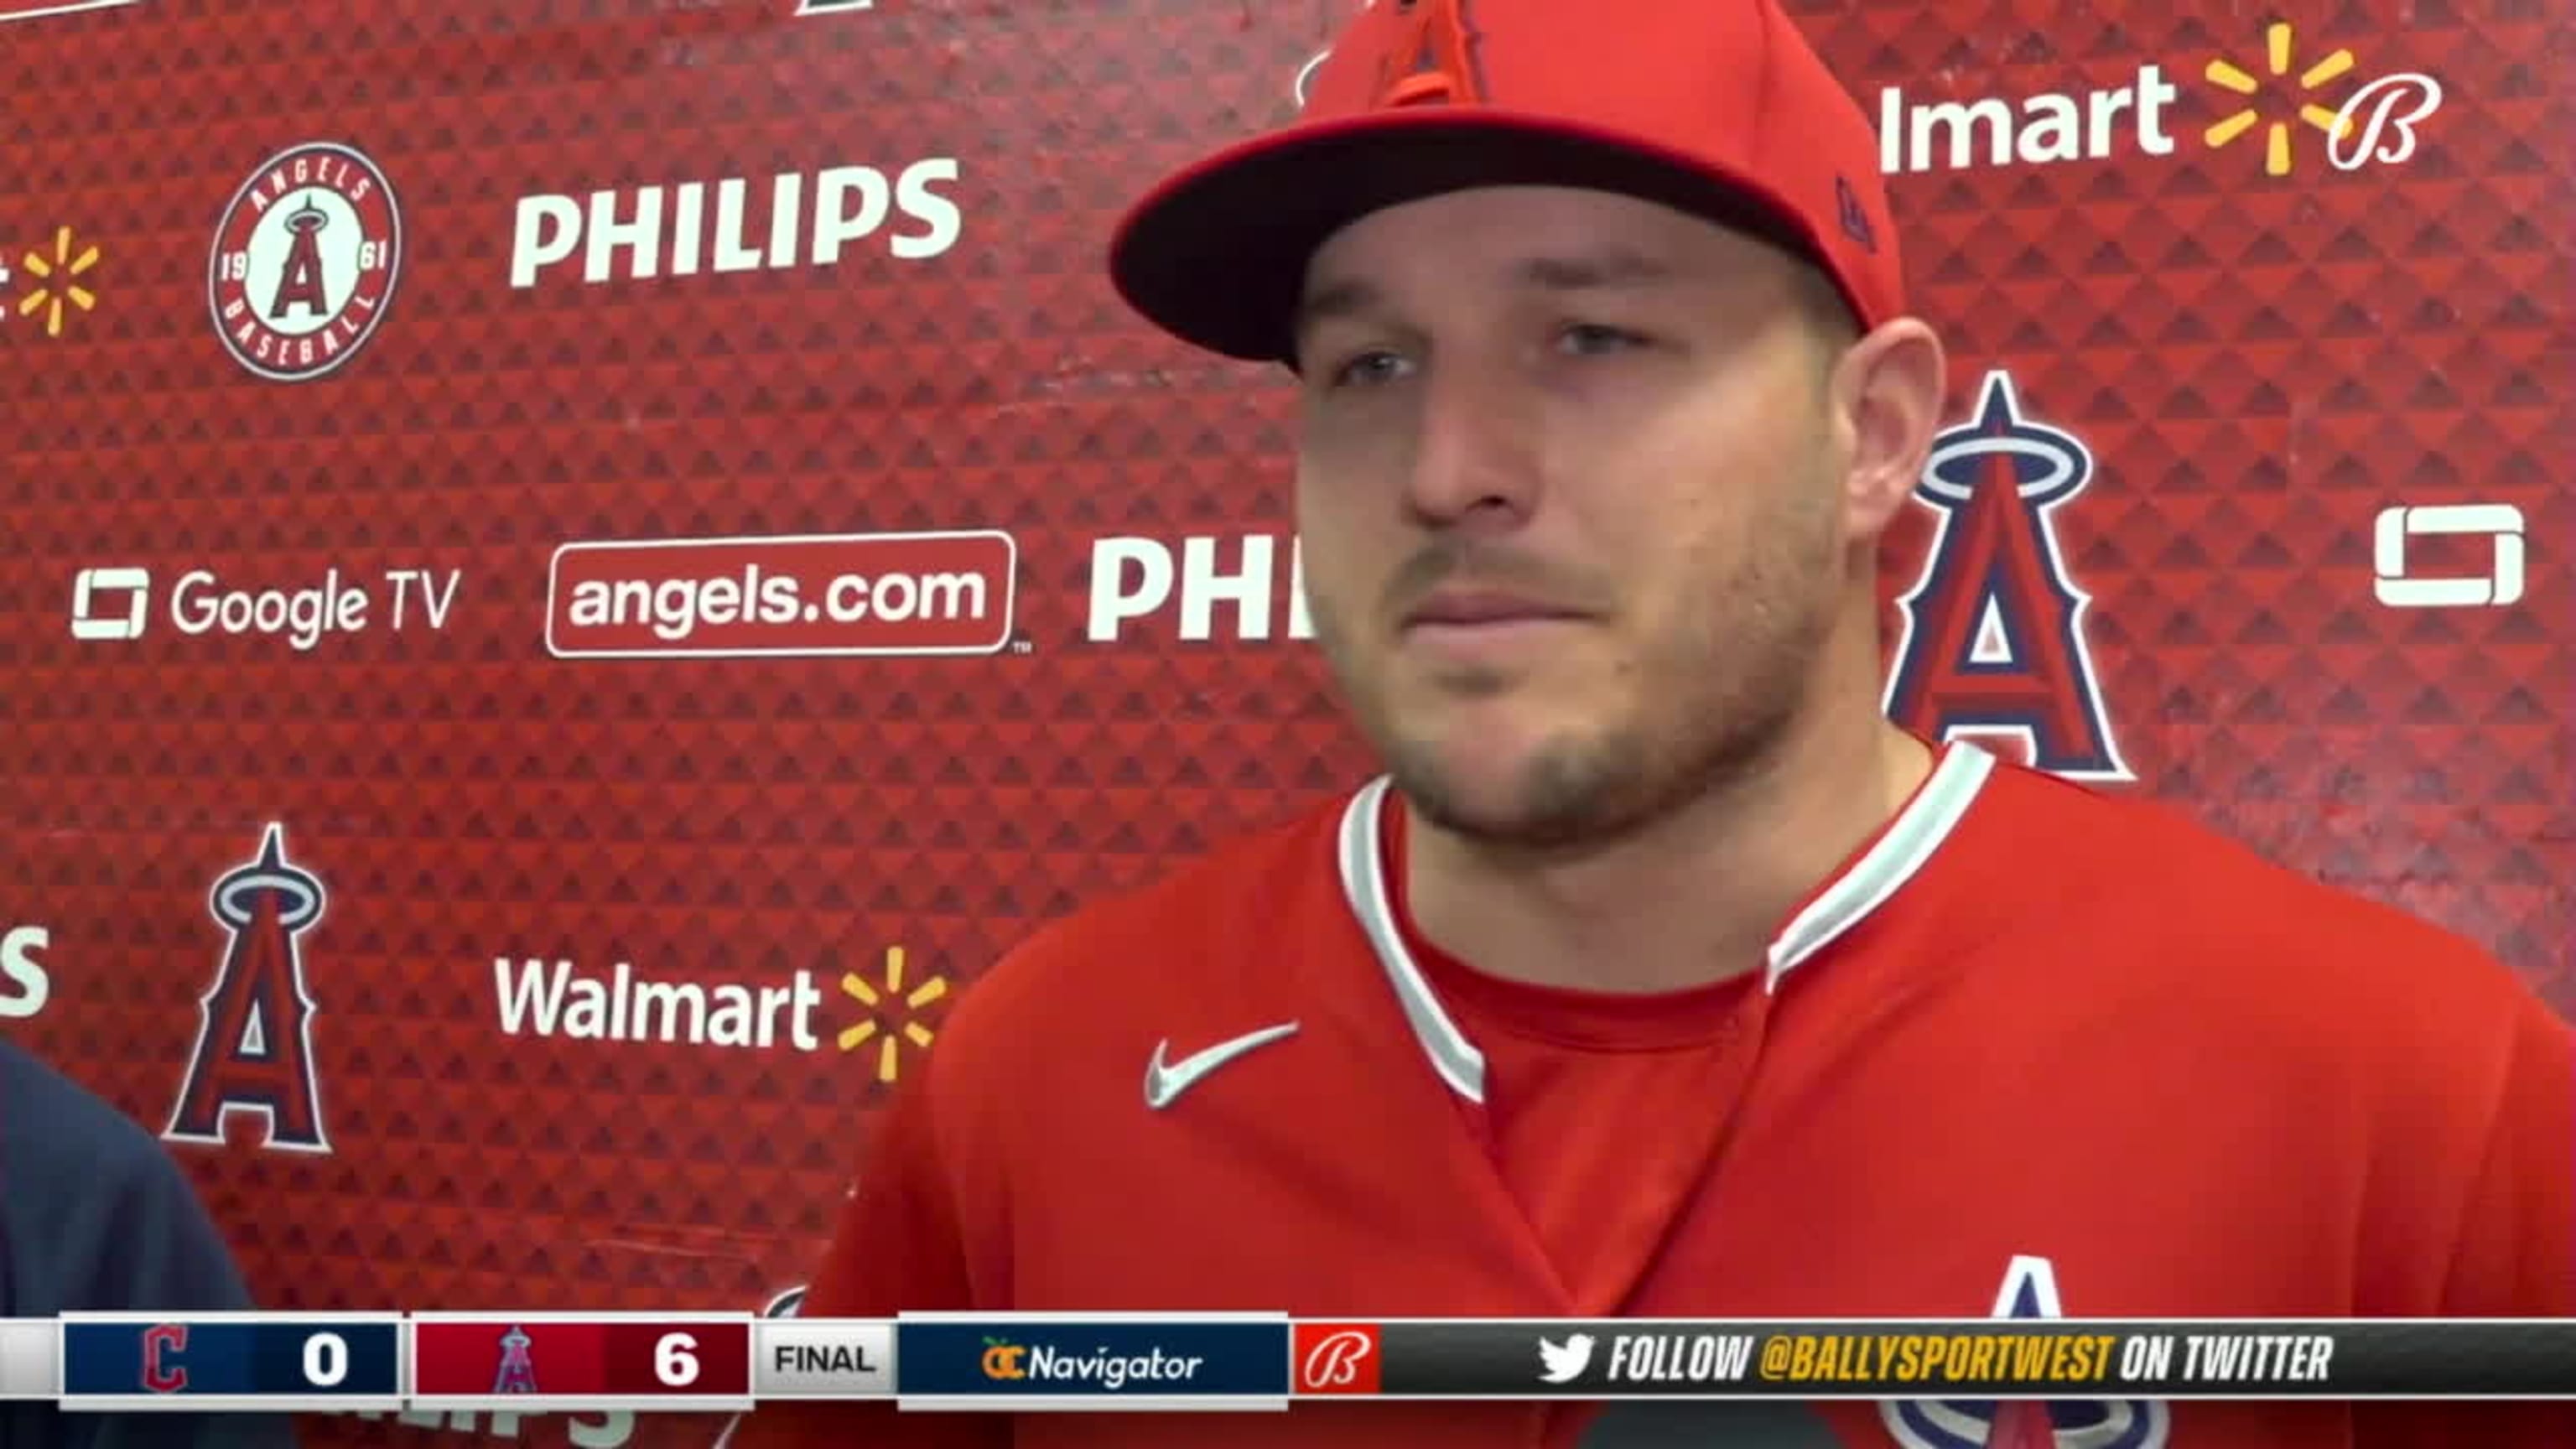 Mike Trout Recruited MLB Stars for World Baseball Classic - The